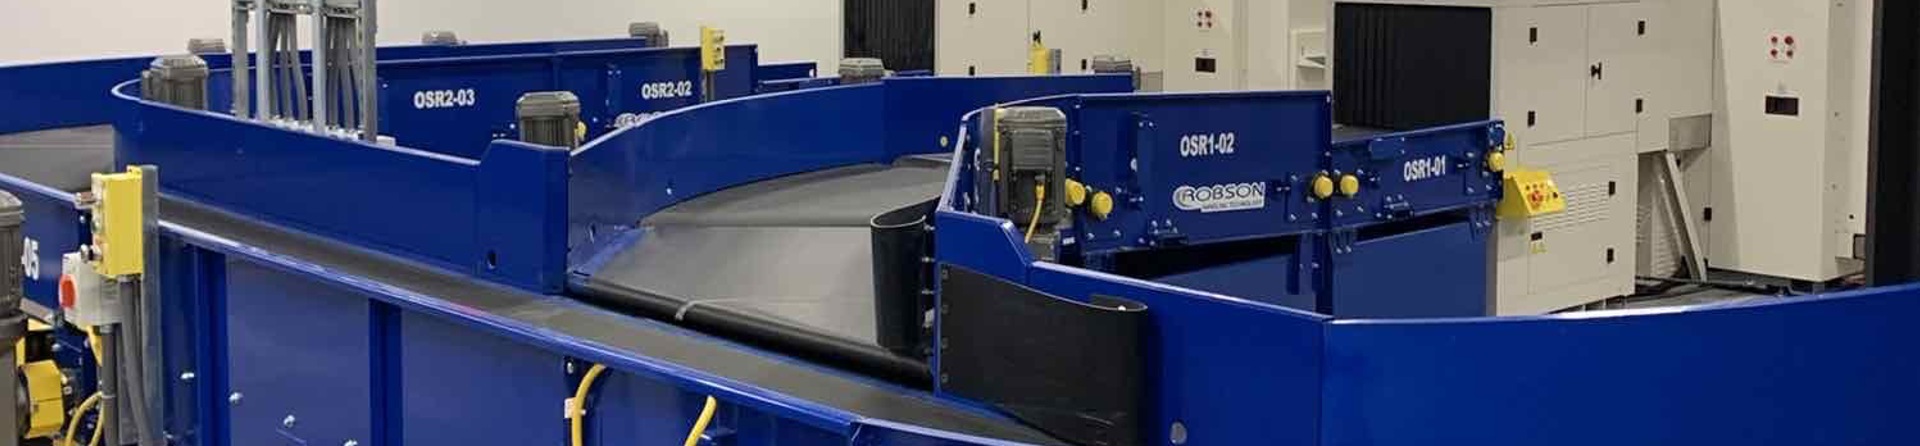 Powered Curve Systems for Airport baggage handling